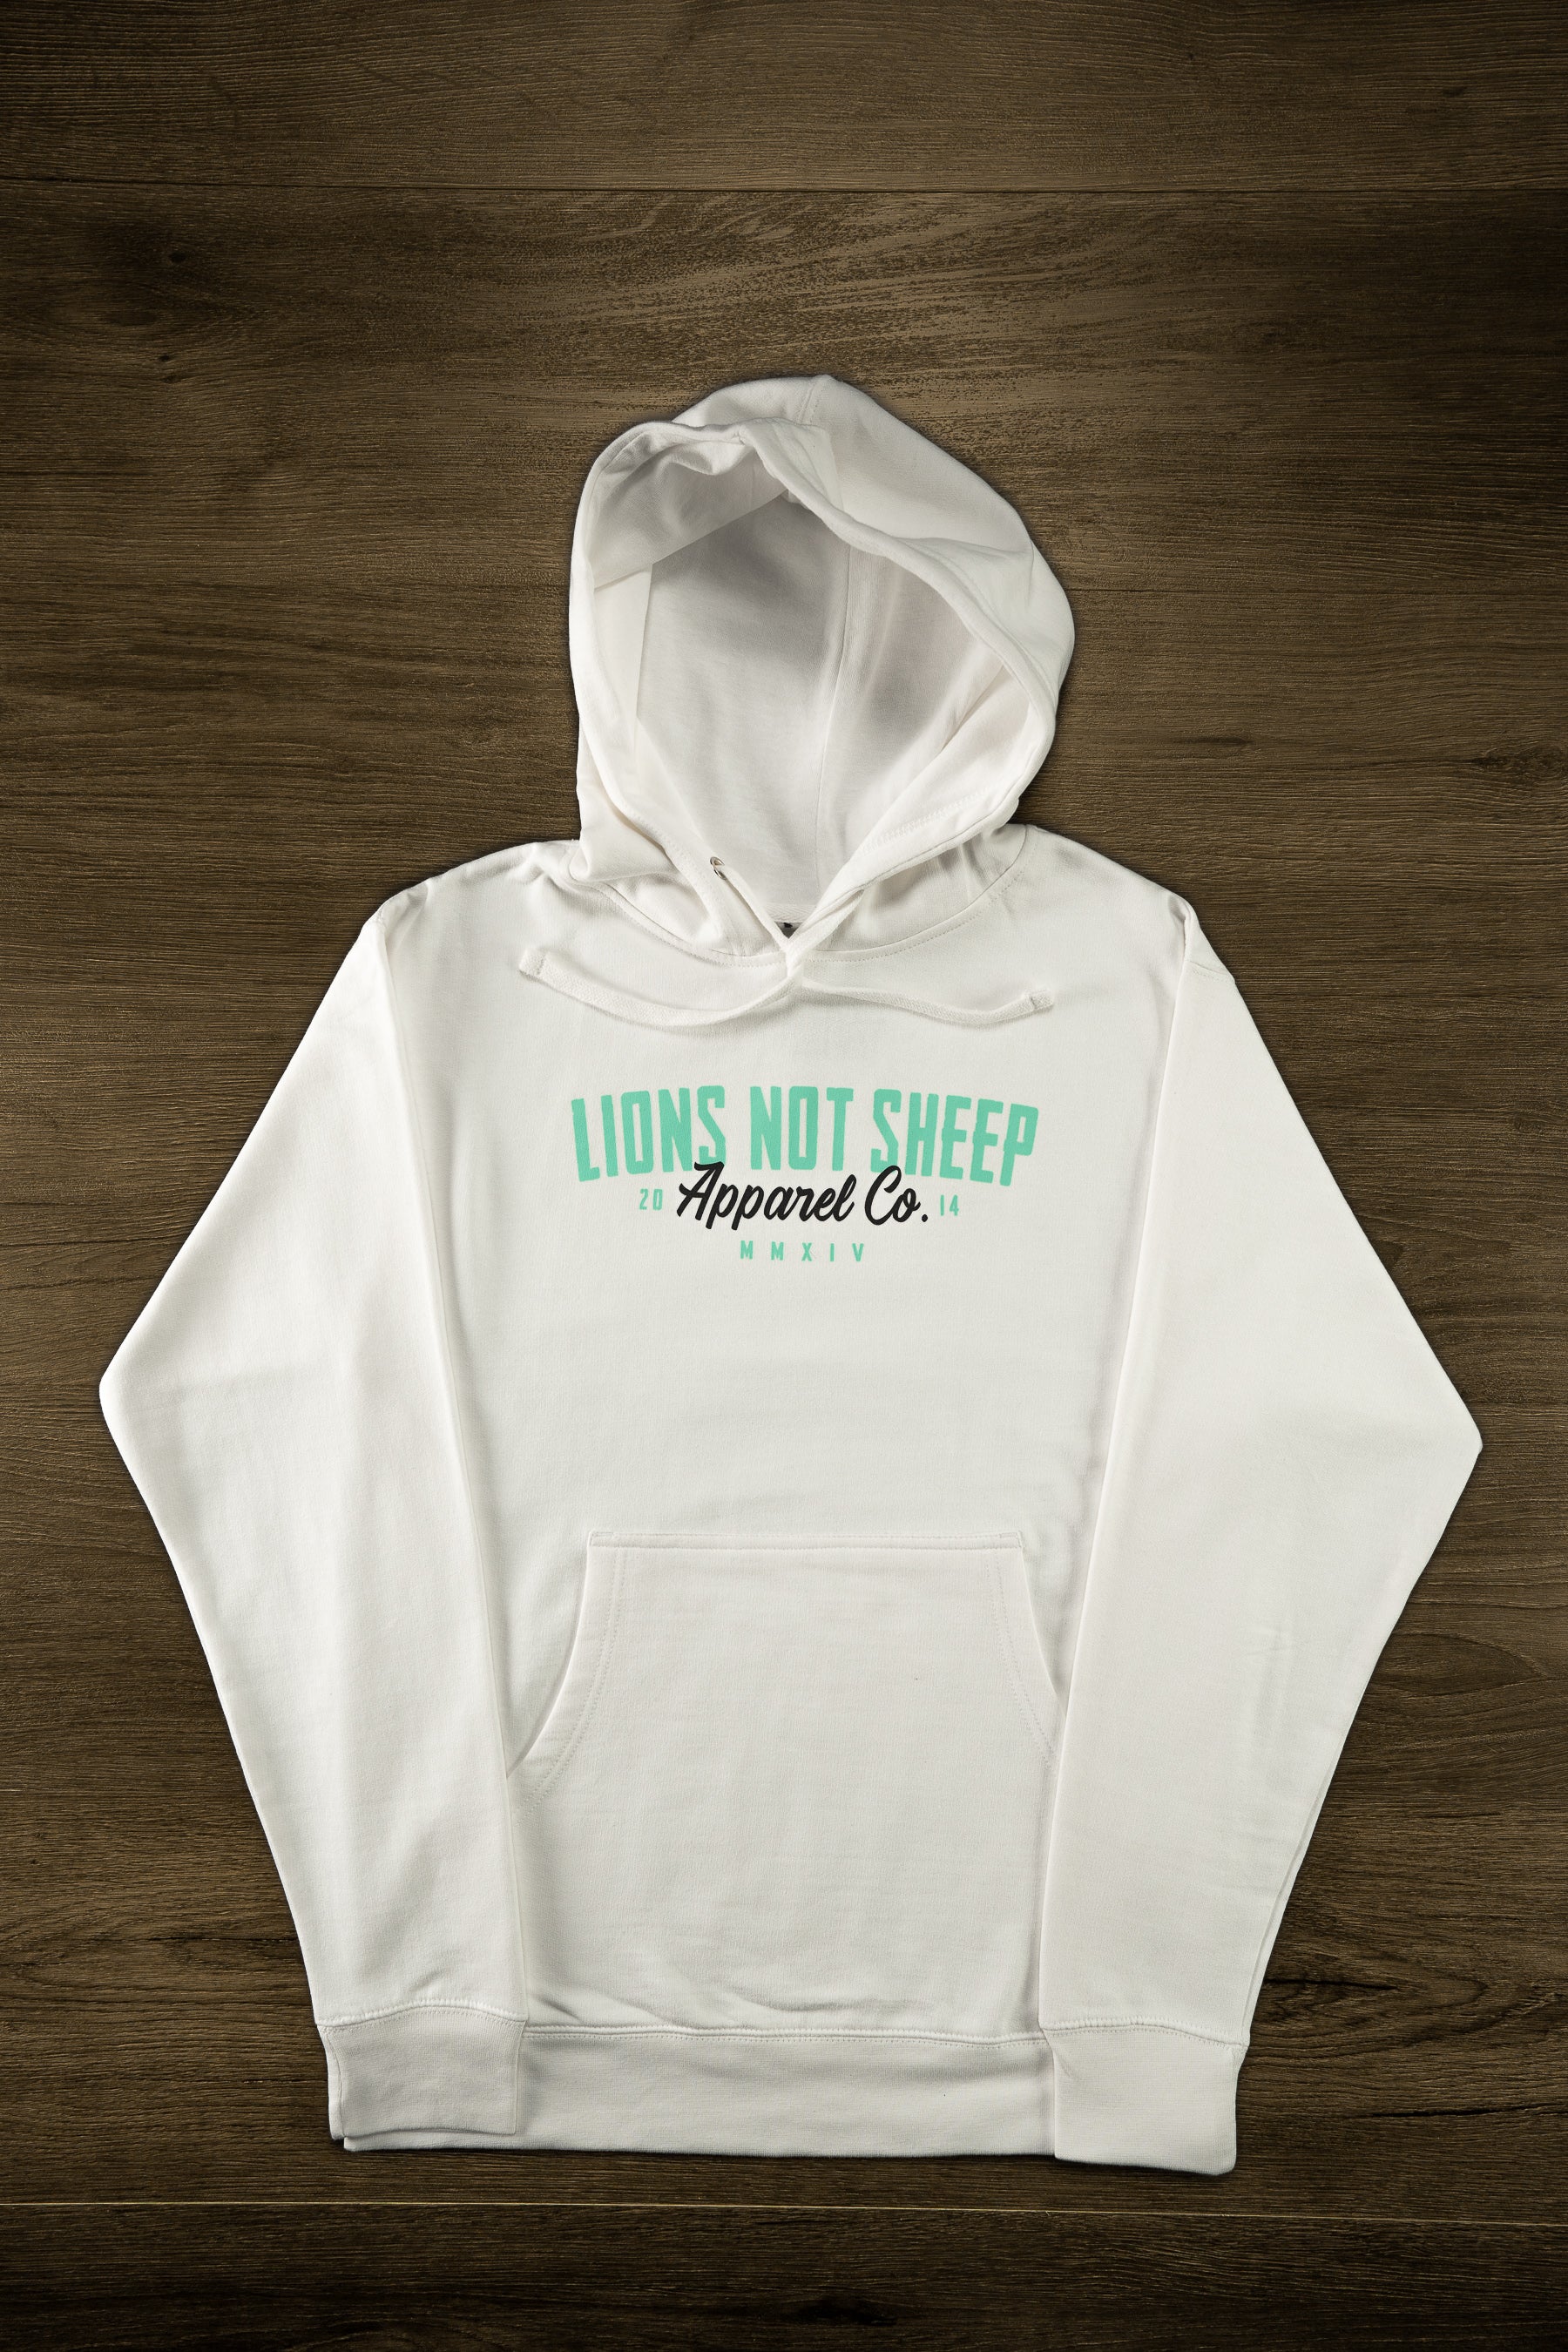 LIONS NOT SHEEP APPAREL CO. 2.0 Unisex Pullover Hoodie - Lions Not Sheep ®